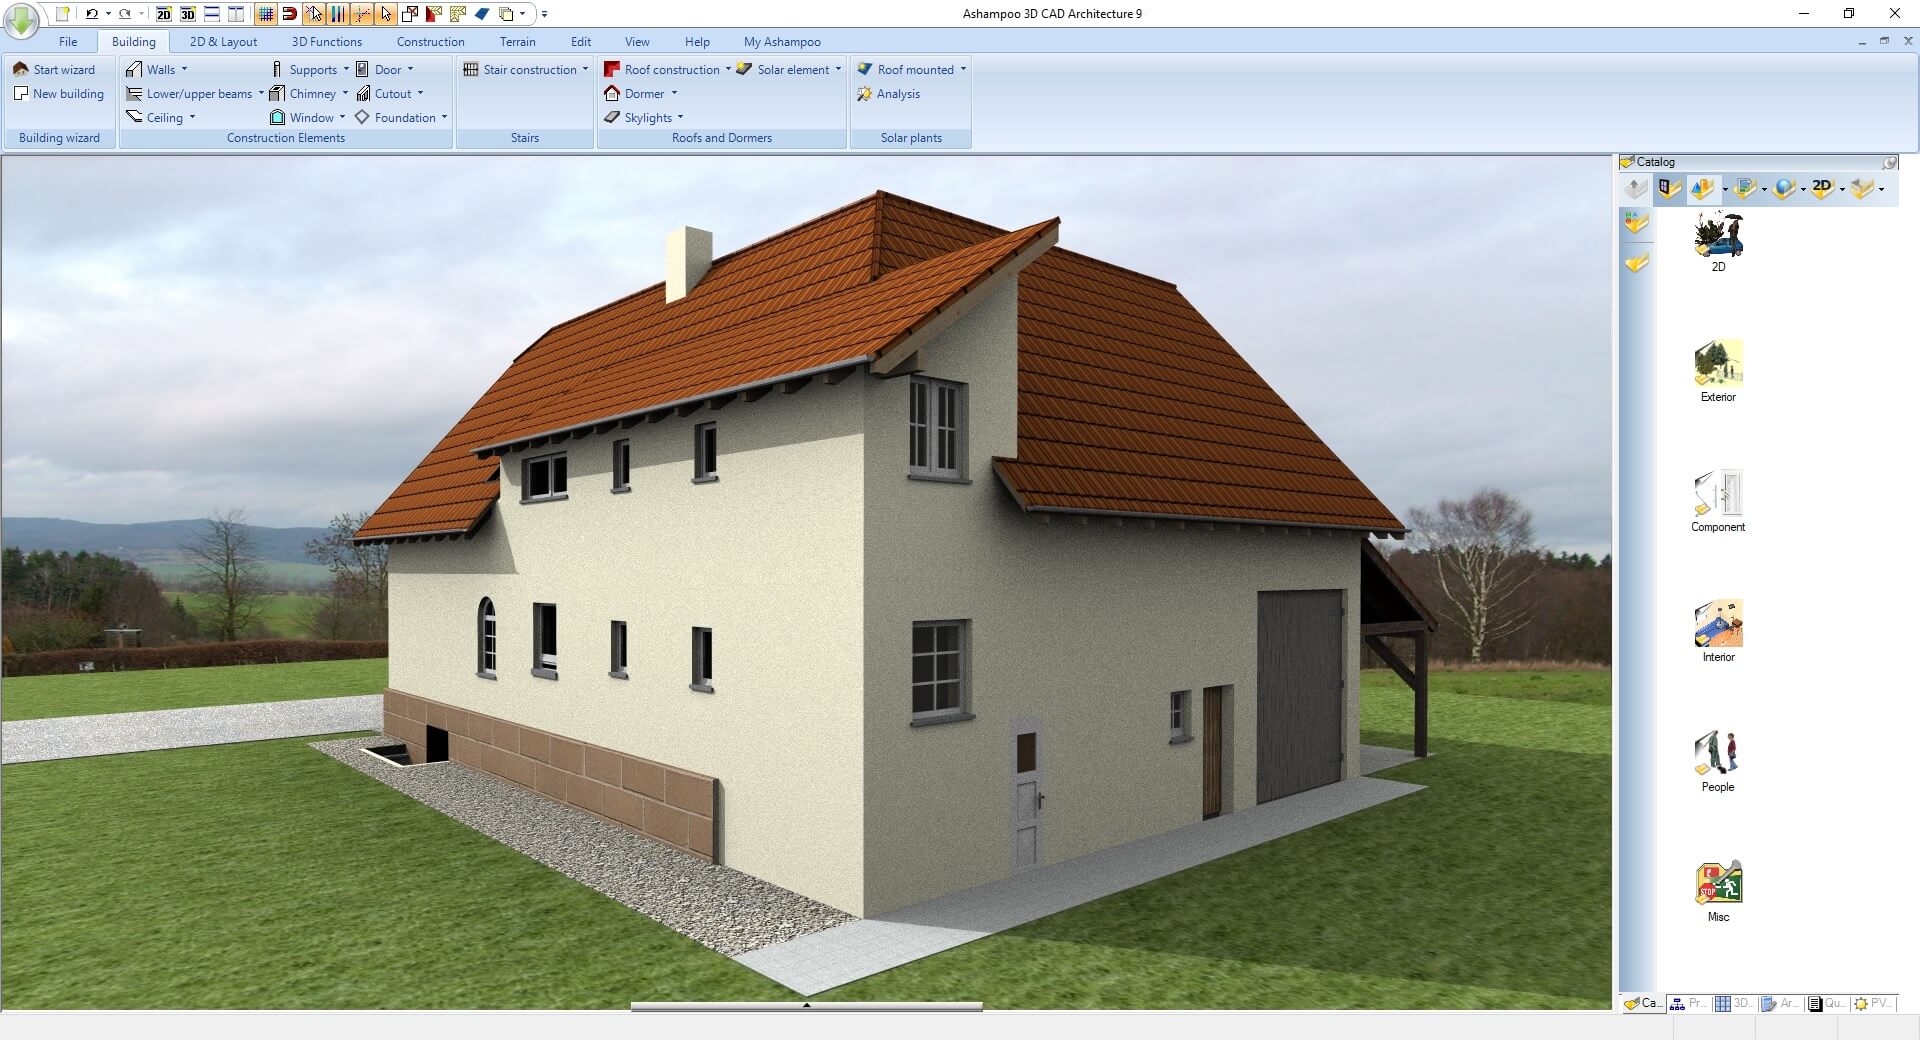 Working with Ashampoo 3D CAD Professional 9.0 full license